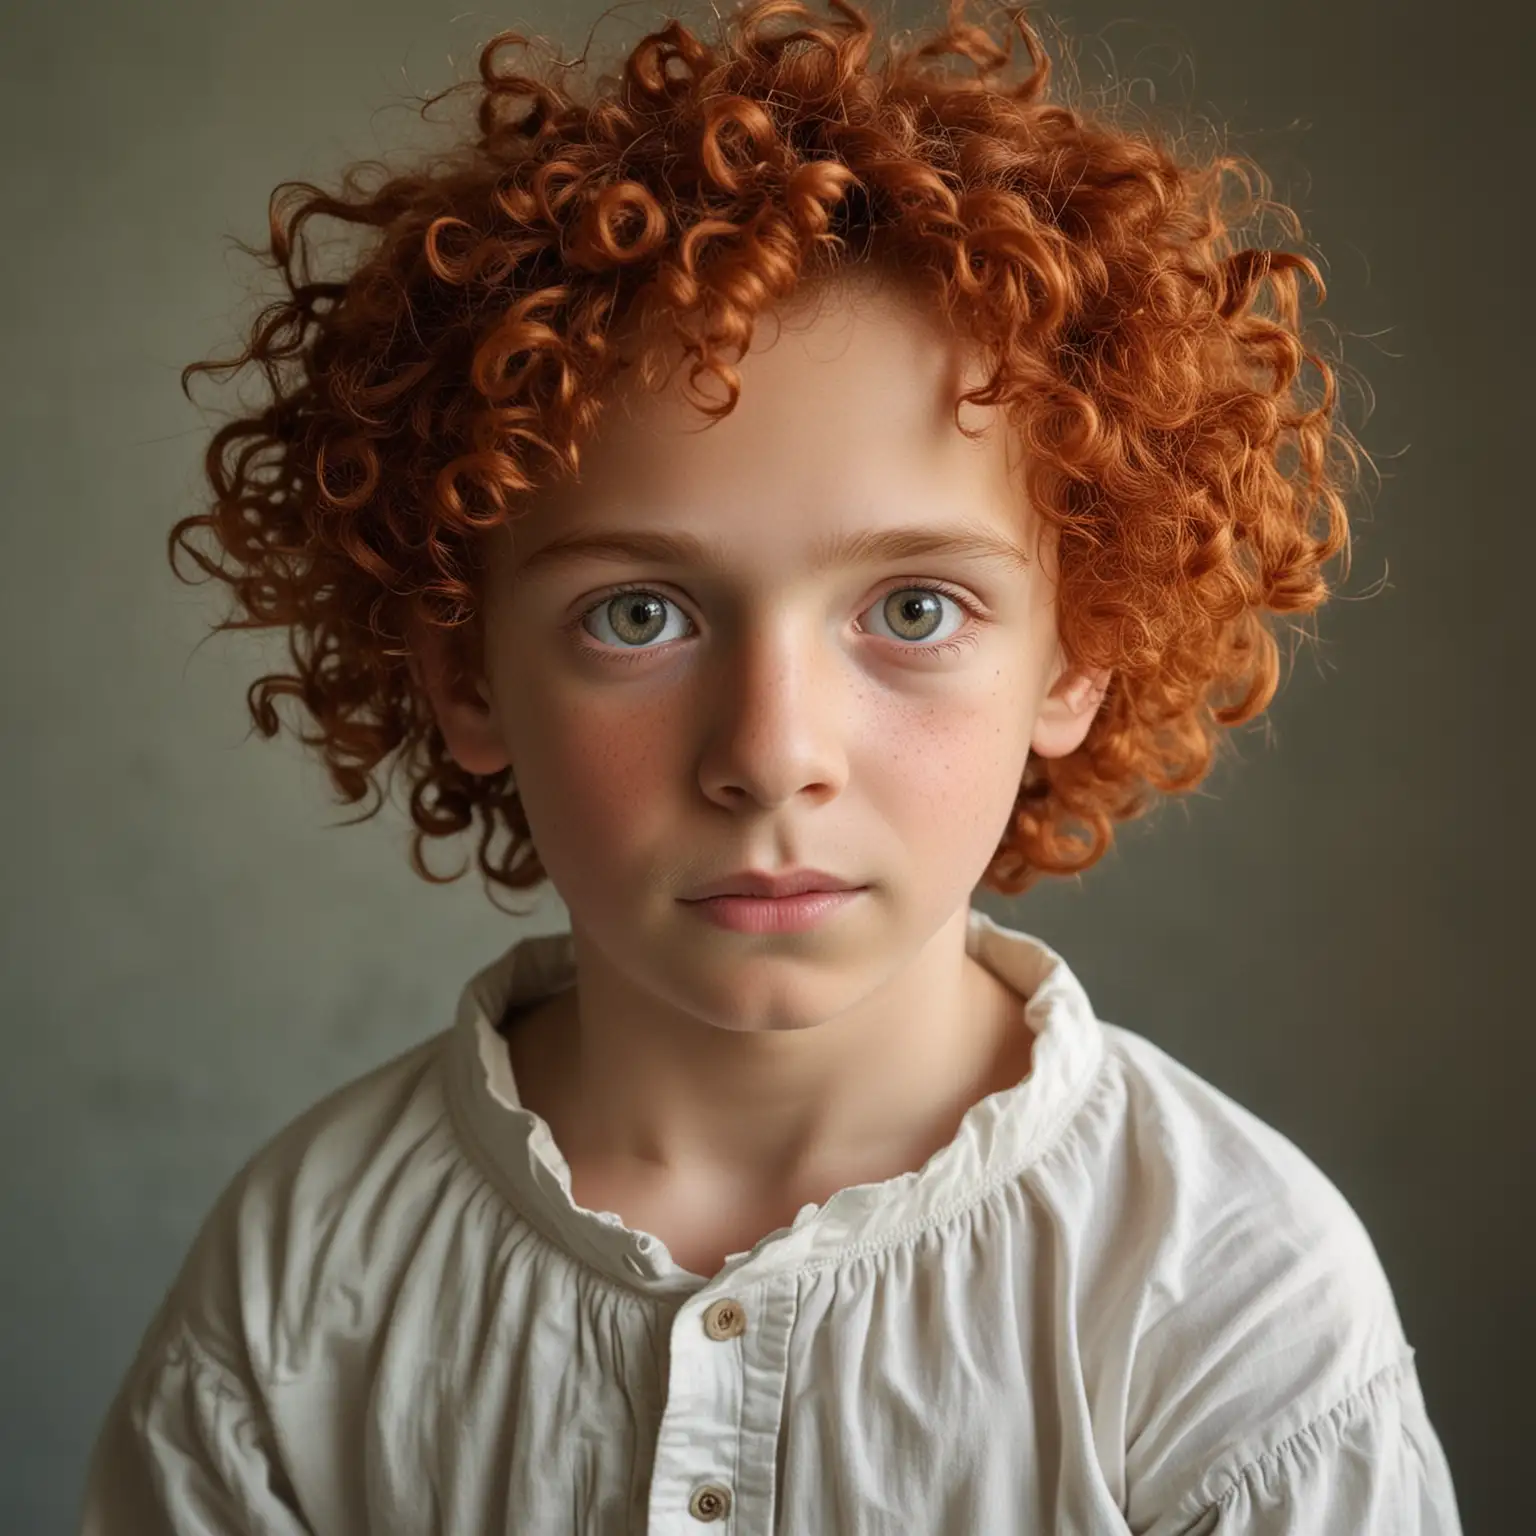 Portrait of a Renaissance Boy with Red Curly Hair and Blue Eyes